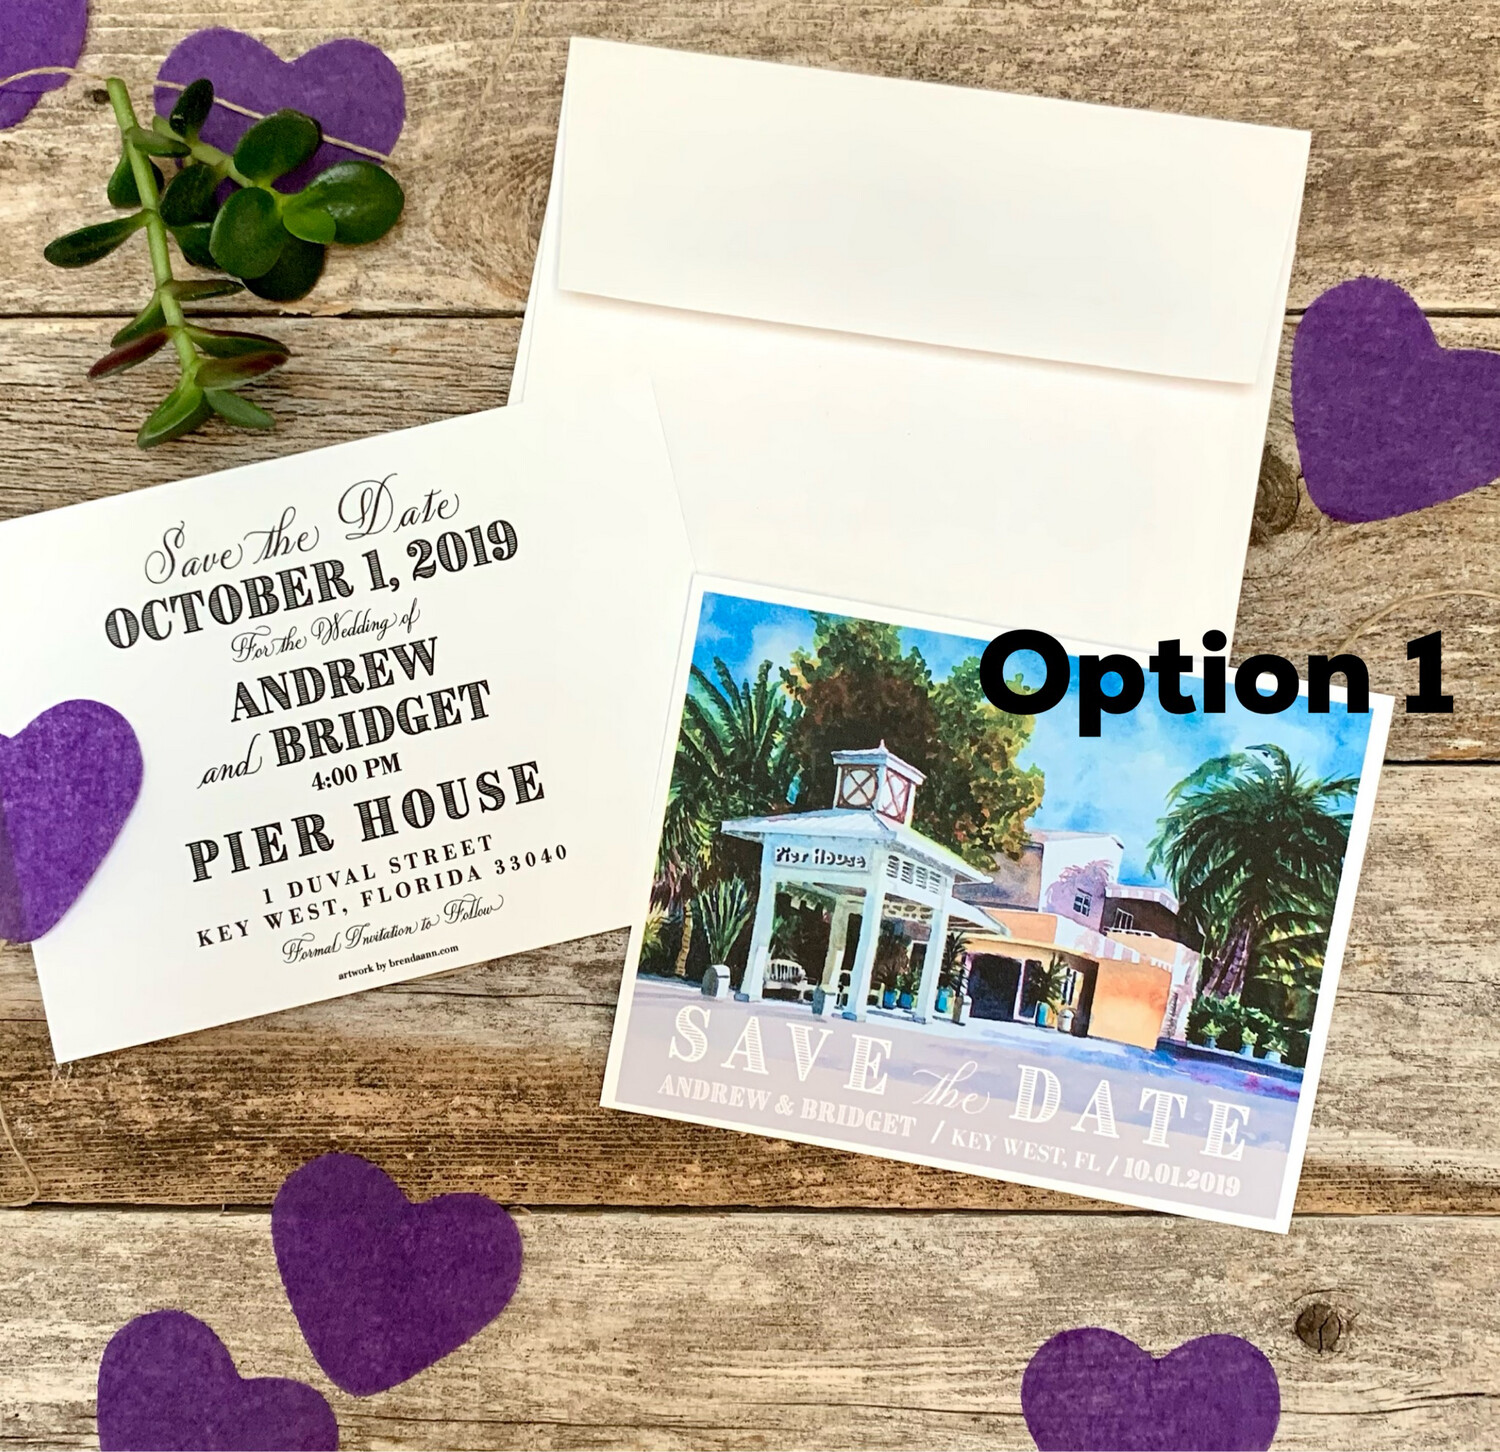 Pier House Resort & Spa Key West Watercolor Wedding Save the Date Cards